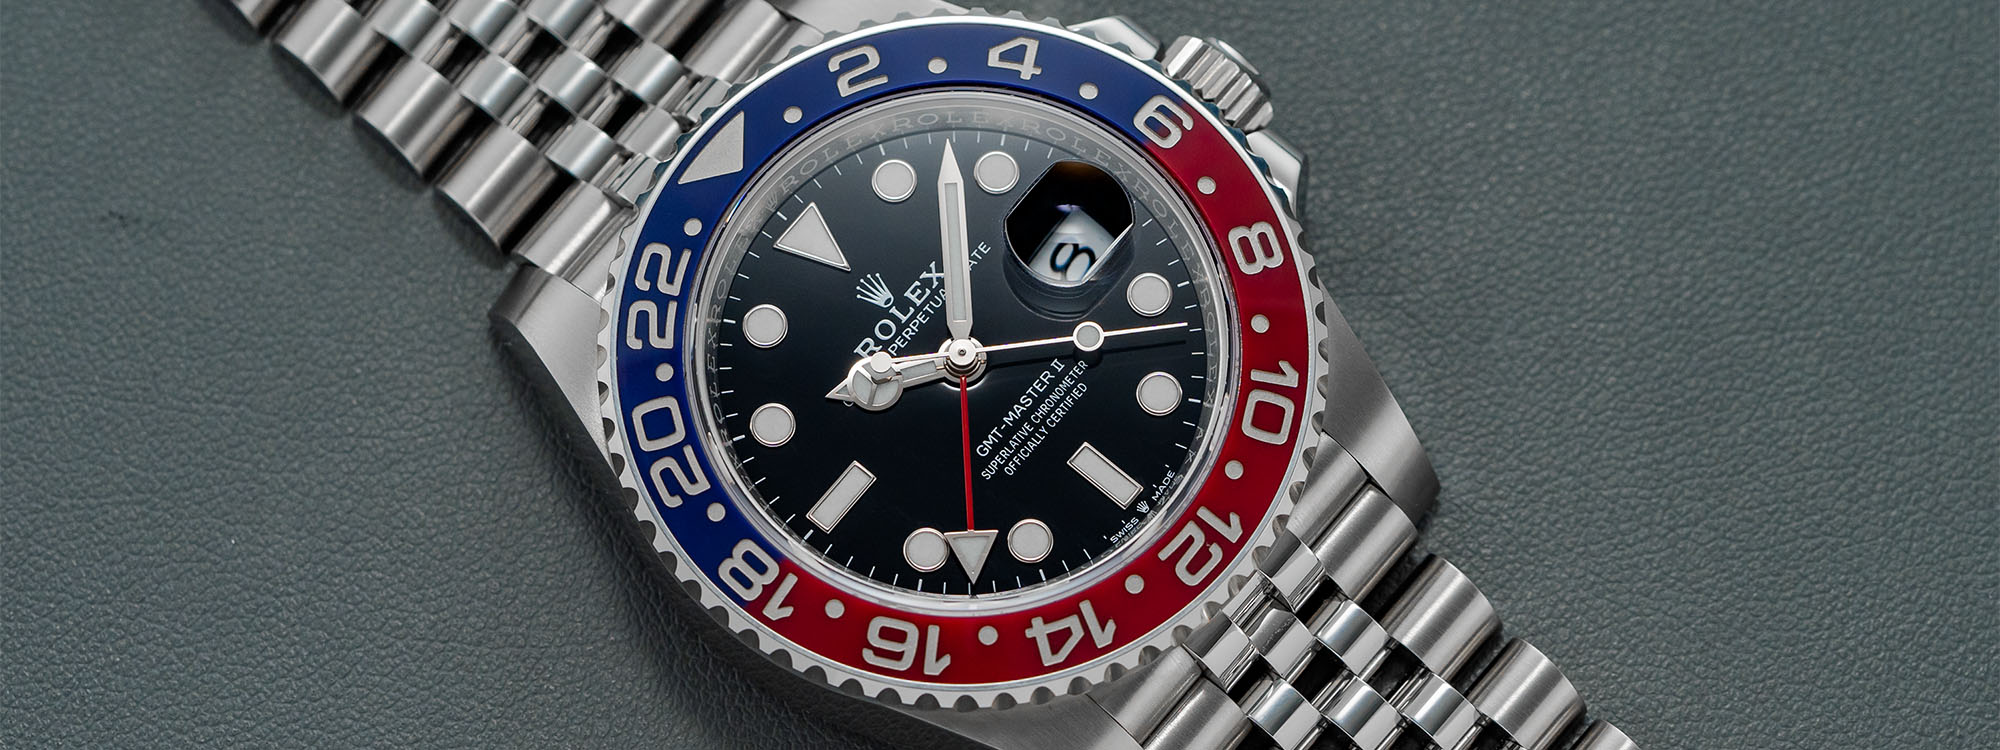 Could G-Shock Be the New Rolex? Why Discerning Collectors Are